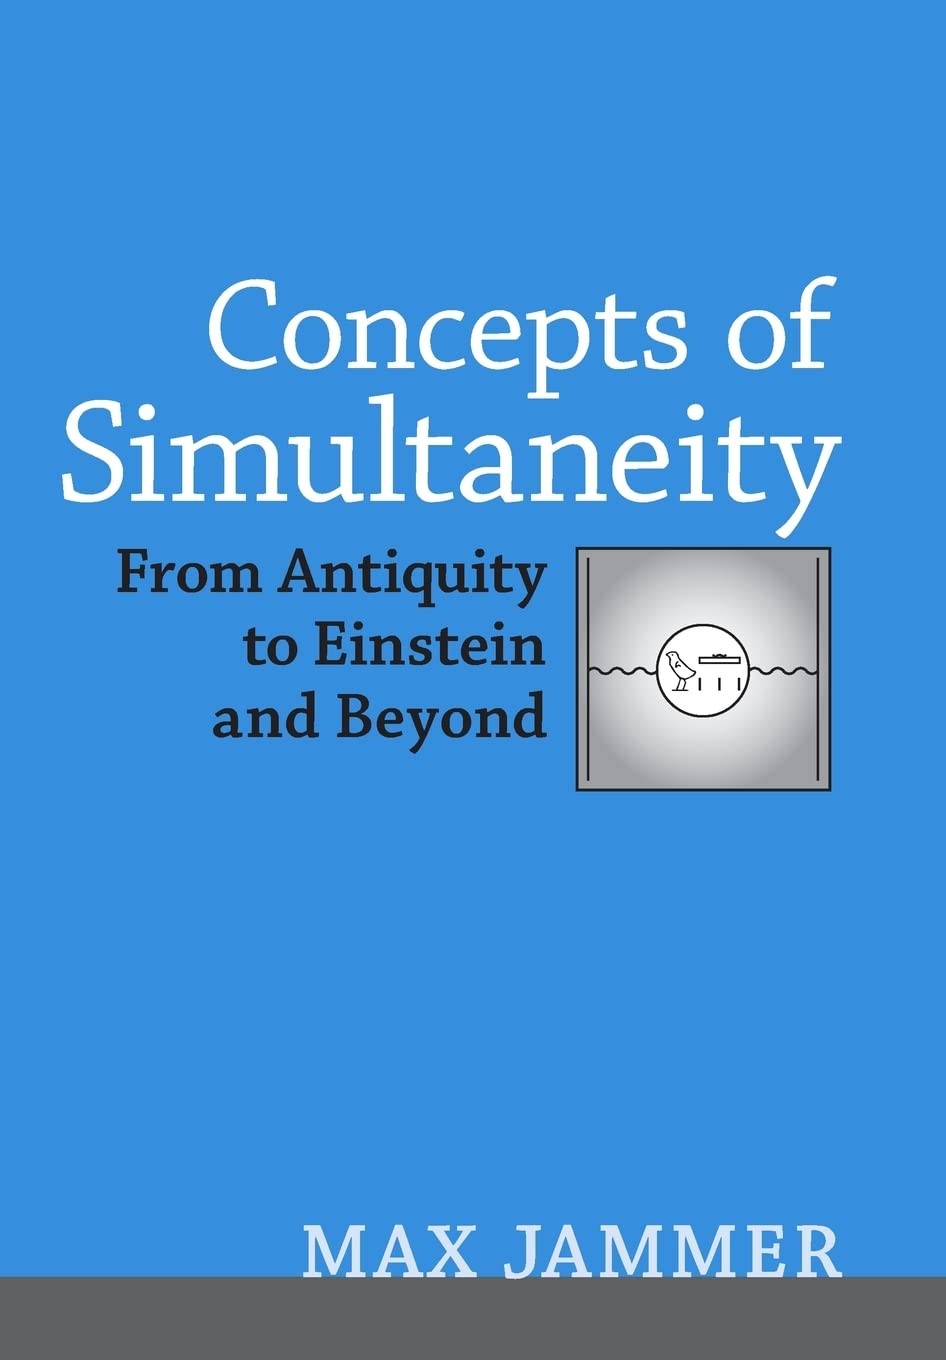 Concepts of Simultaneity: From Antiquity to Einstein and Beyond